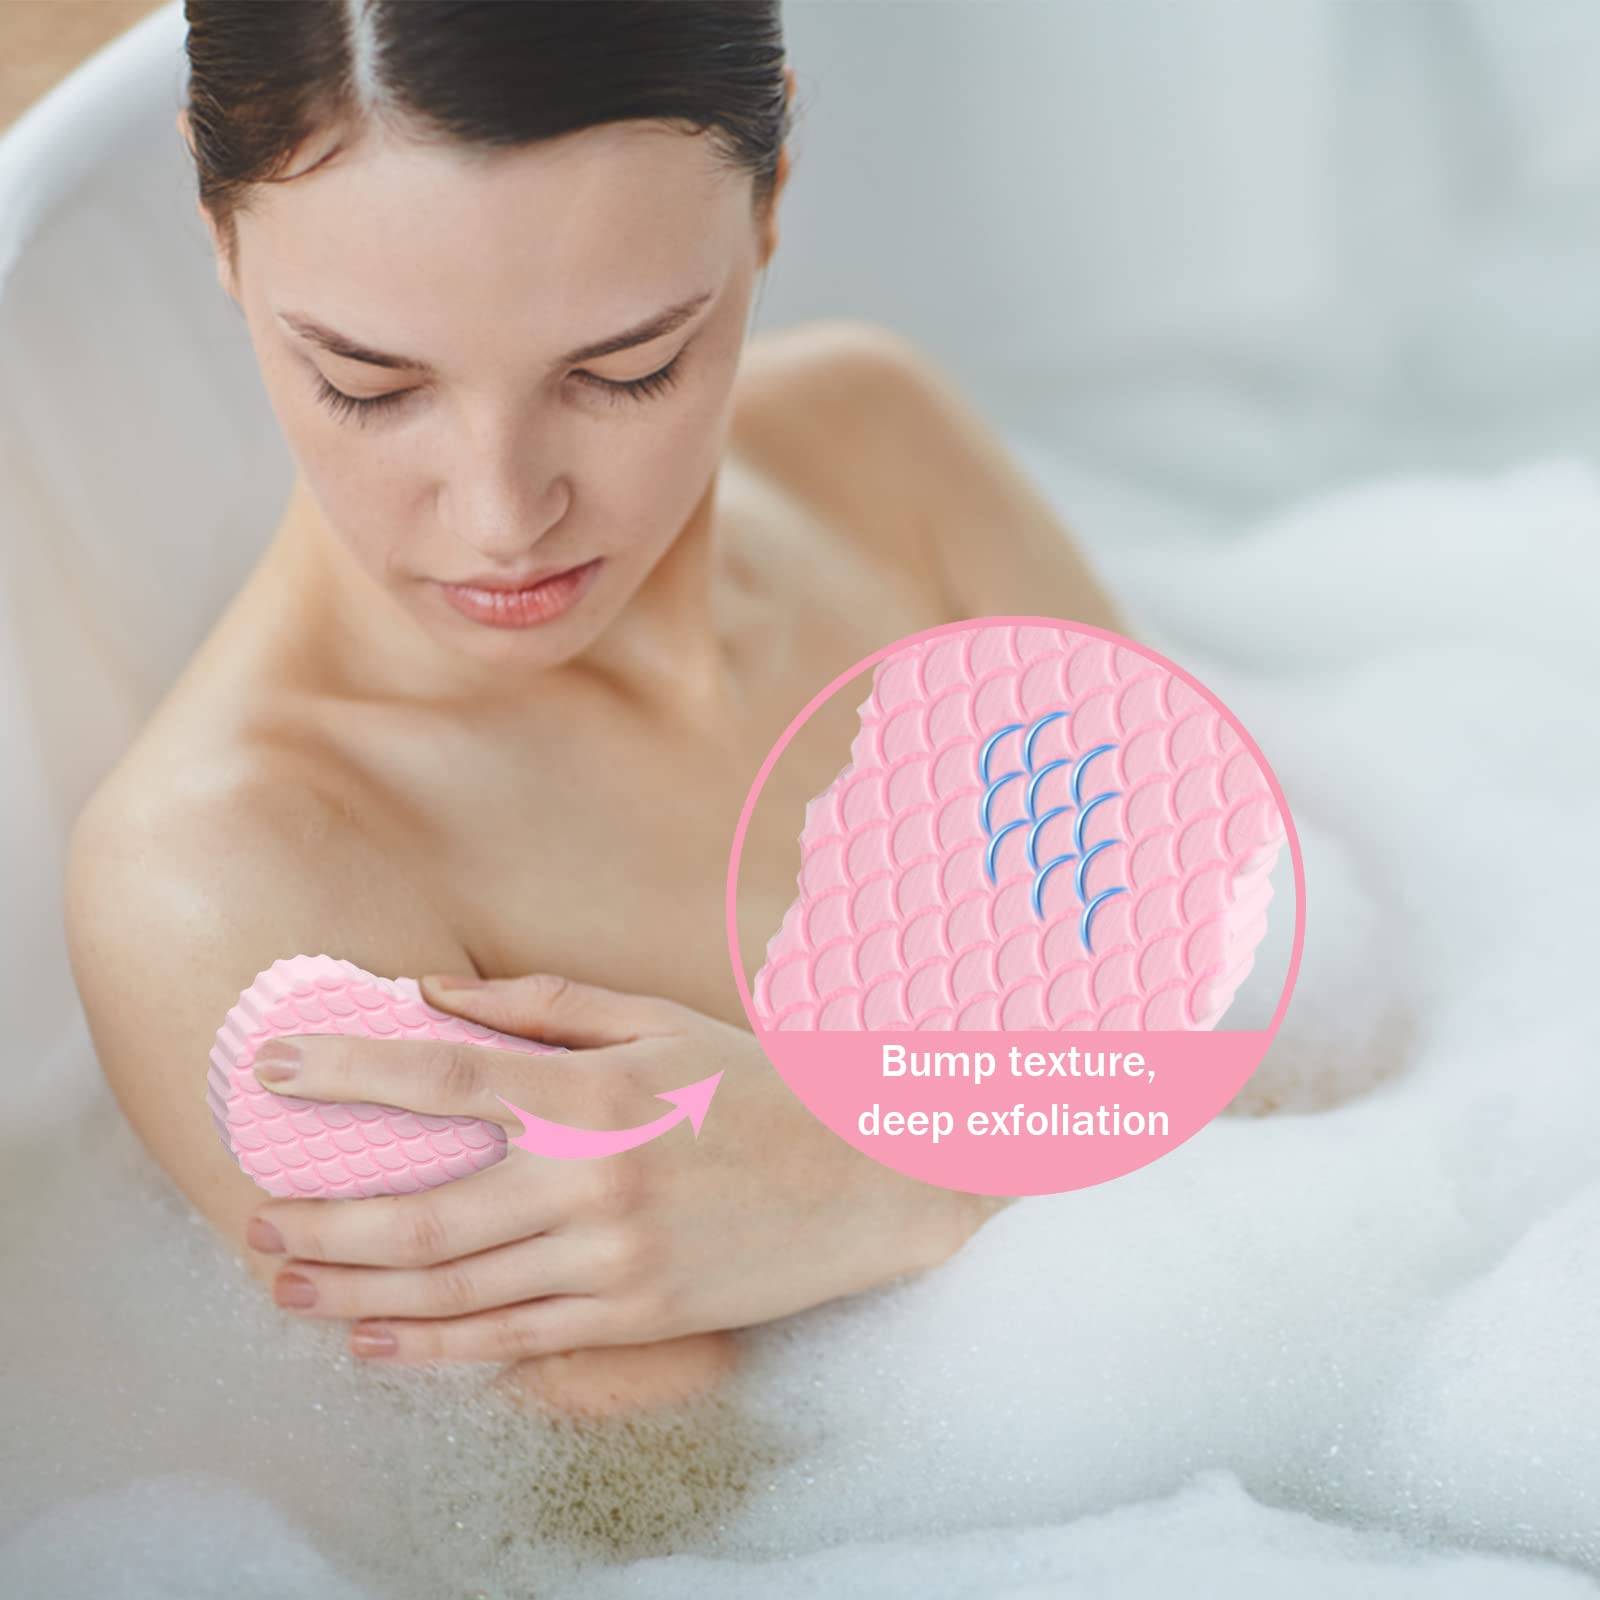 GFPGYQ 3Pcs Super Soft Exfoliating Bath Sponge, Resuable Painless 3D Exfoliating Dead Skin Body Sponge with 3 Sticky Hooks, for Adults Men Children and Pregnant Women